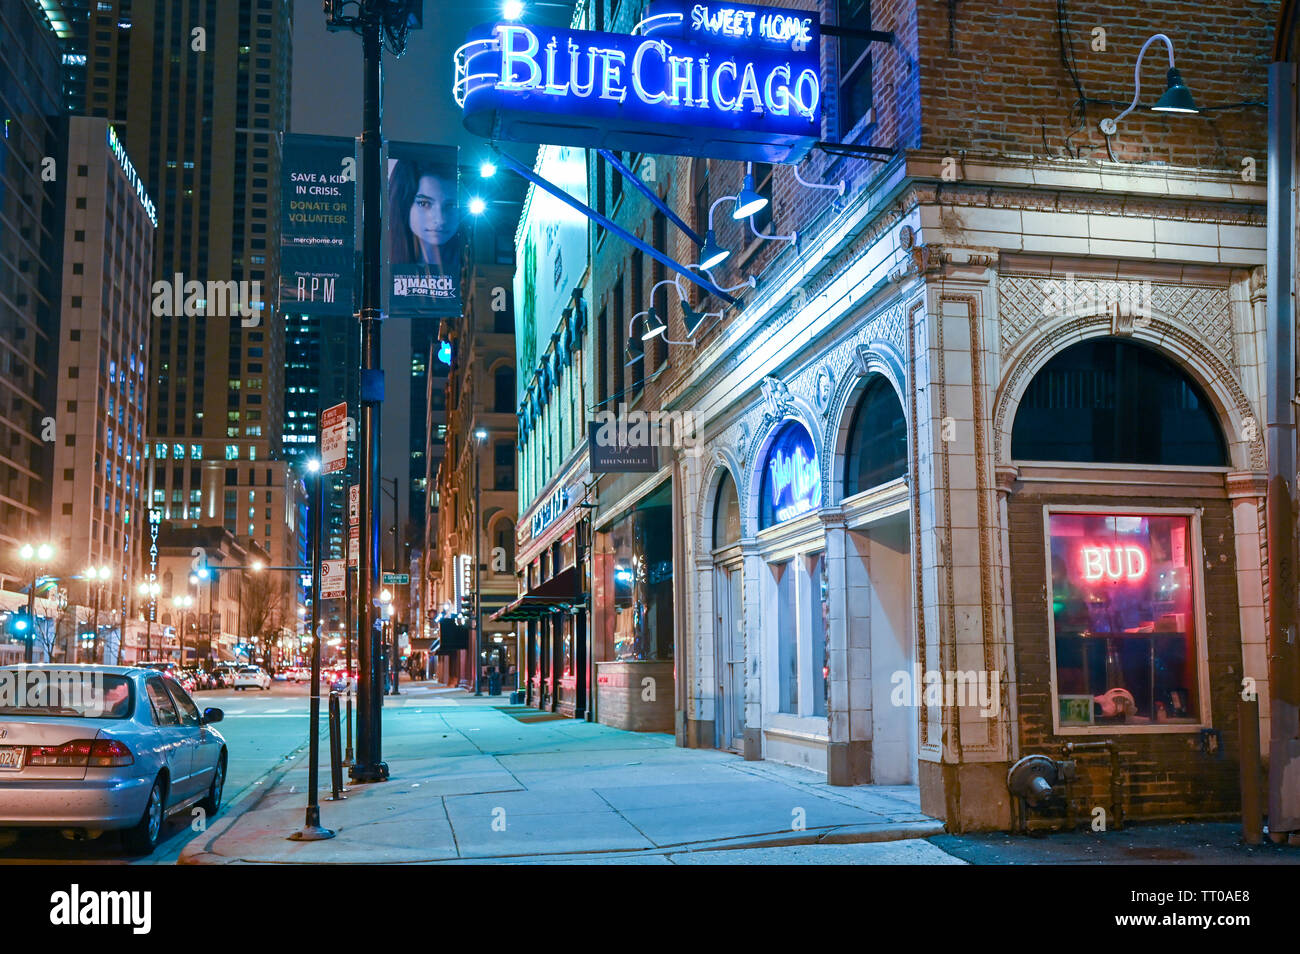 Blue Chicago by night on North Clarke Street in downtown Chicago. This famous blues club opened in 1985. Stock Photo